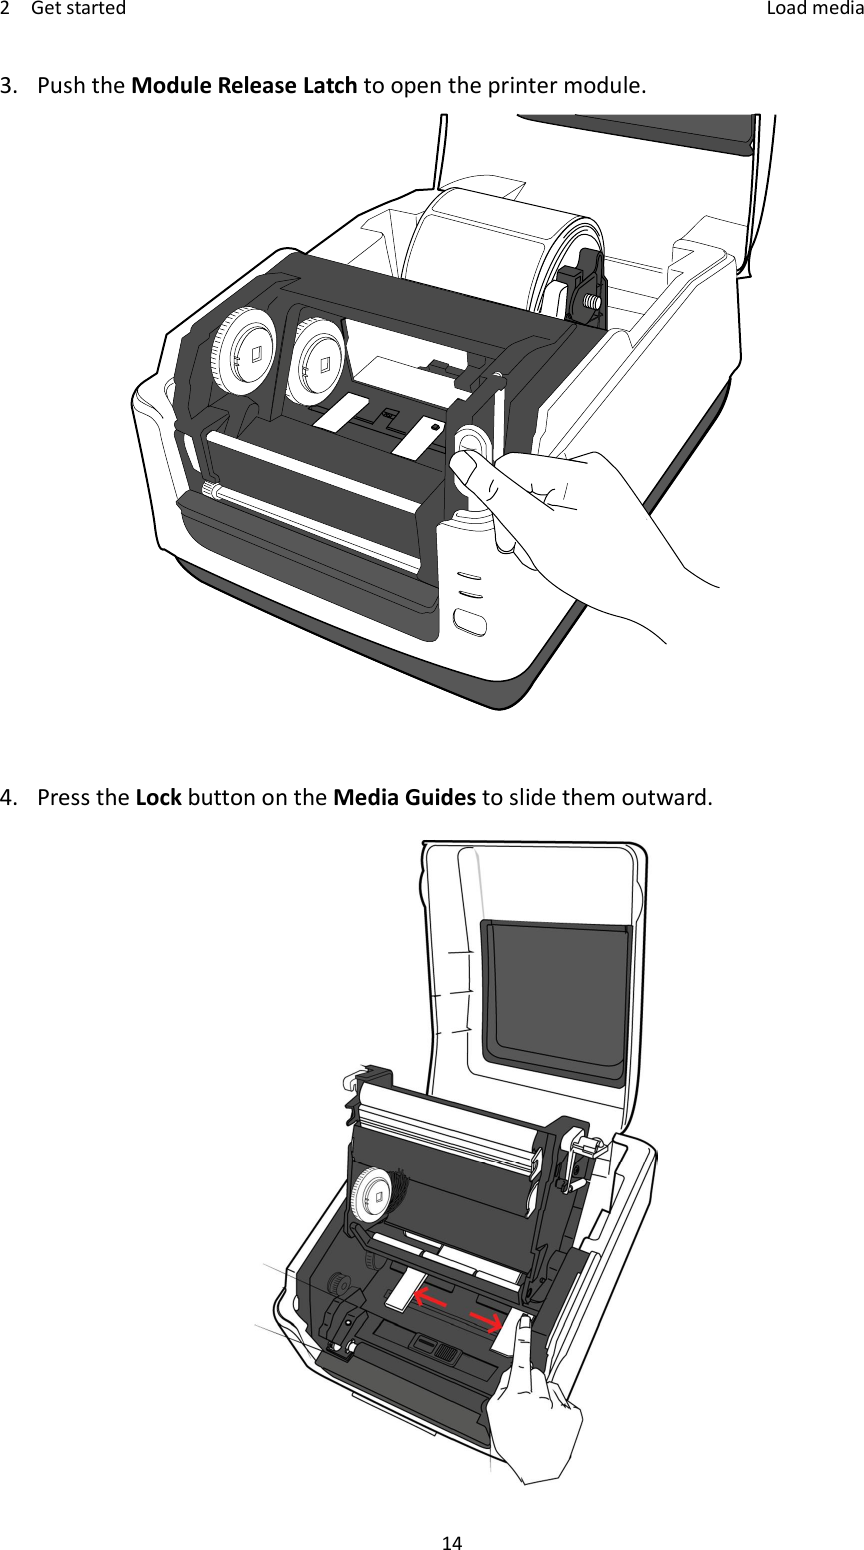 2    Get started    Load media 14 3. Push the Module Release Latch to open the printer module.   4. Press the Lock button on the Media Guides to slide them outward.  